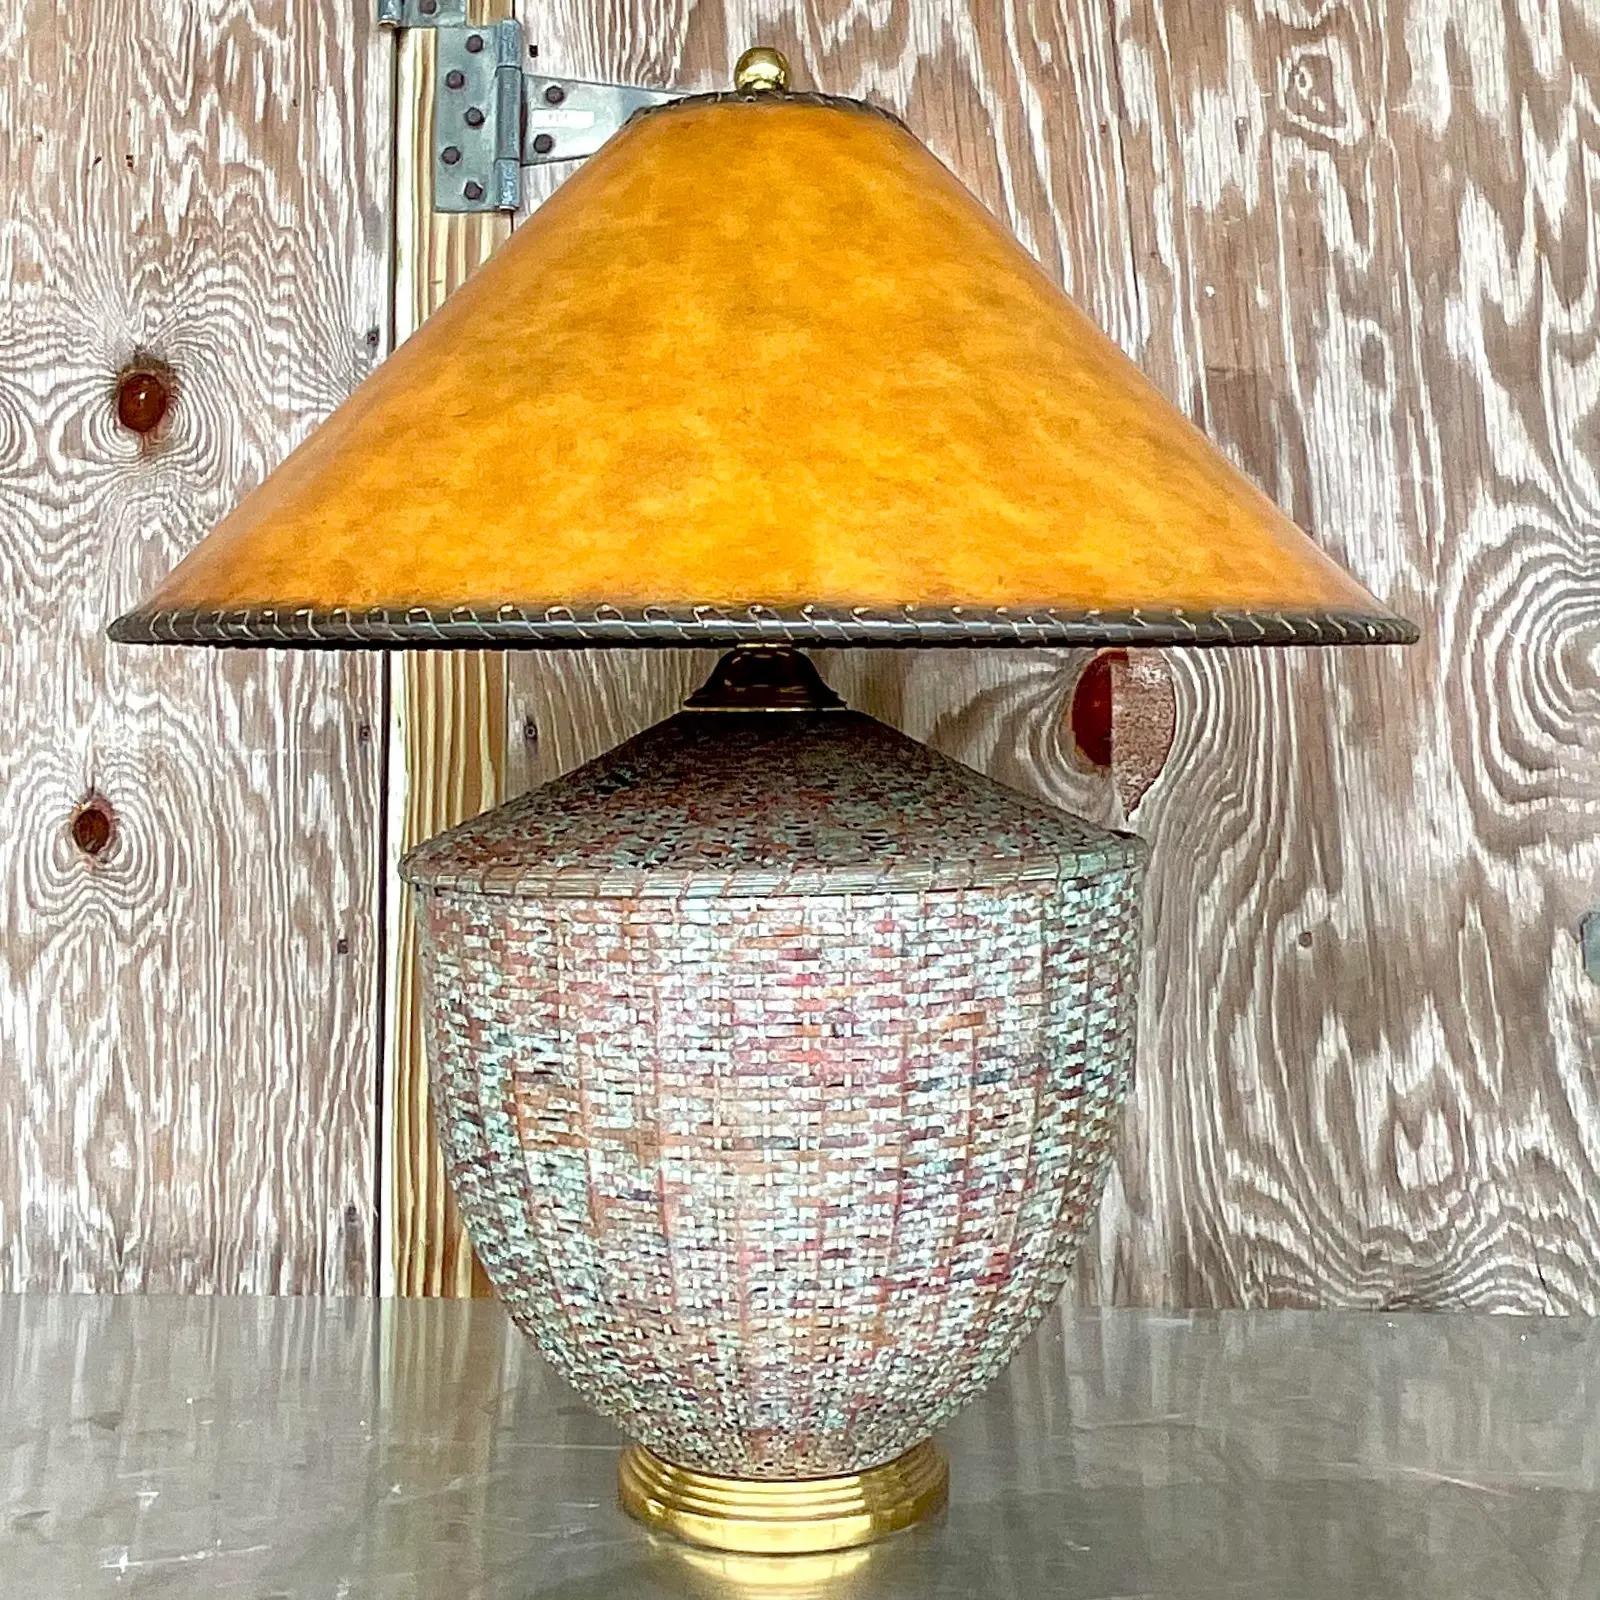 Fabulous vintage Regency table lamp. Made by the iconic Maitland Smith group. Beautiful patinated rattan with a chic leather shade. Marked on the bottom. Acquired from a Palm Beach estate.